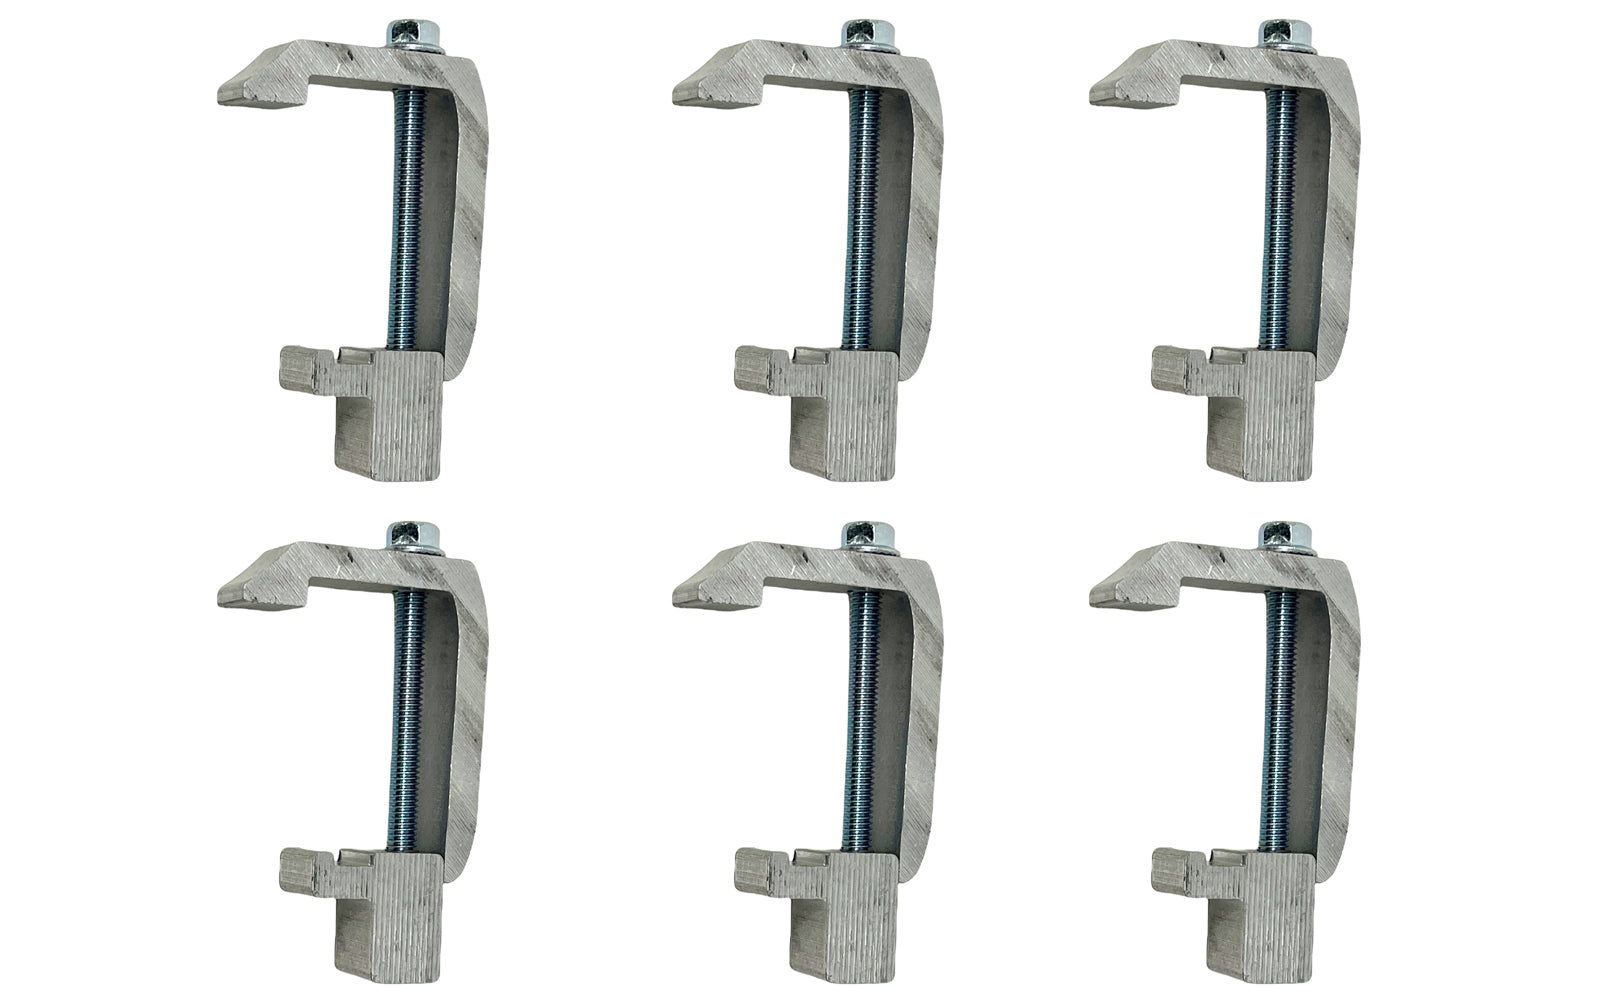 GCi STRONGER BY DESIGN G-121 Utility Rail System Mounting Clamps for Caps and Camper Shells on Toyota Tundra '07 & Newer, Tacoma '07 and Newer and Jeep Gladiator (1 3/4 inch, 6 pk)